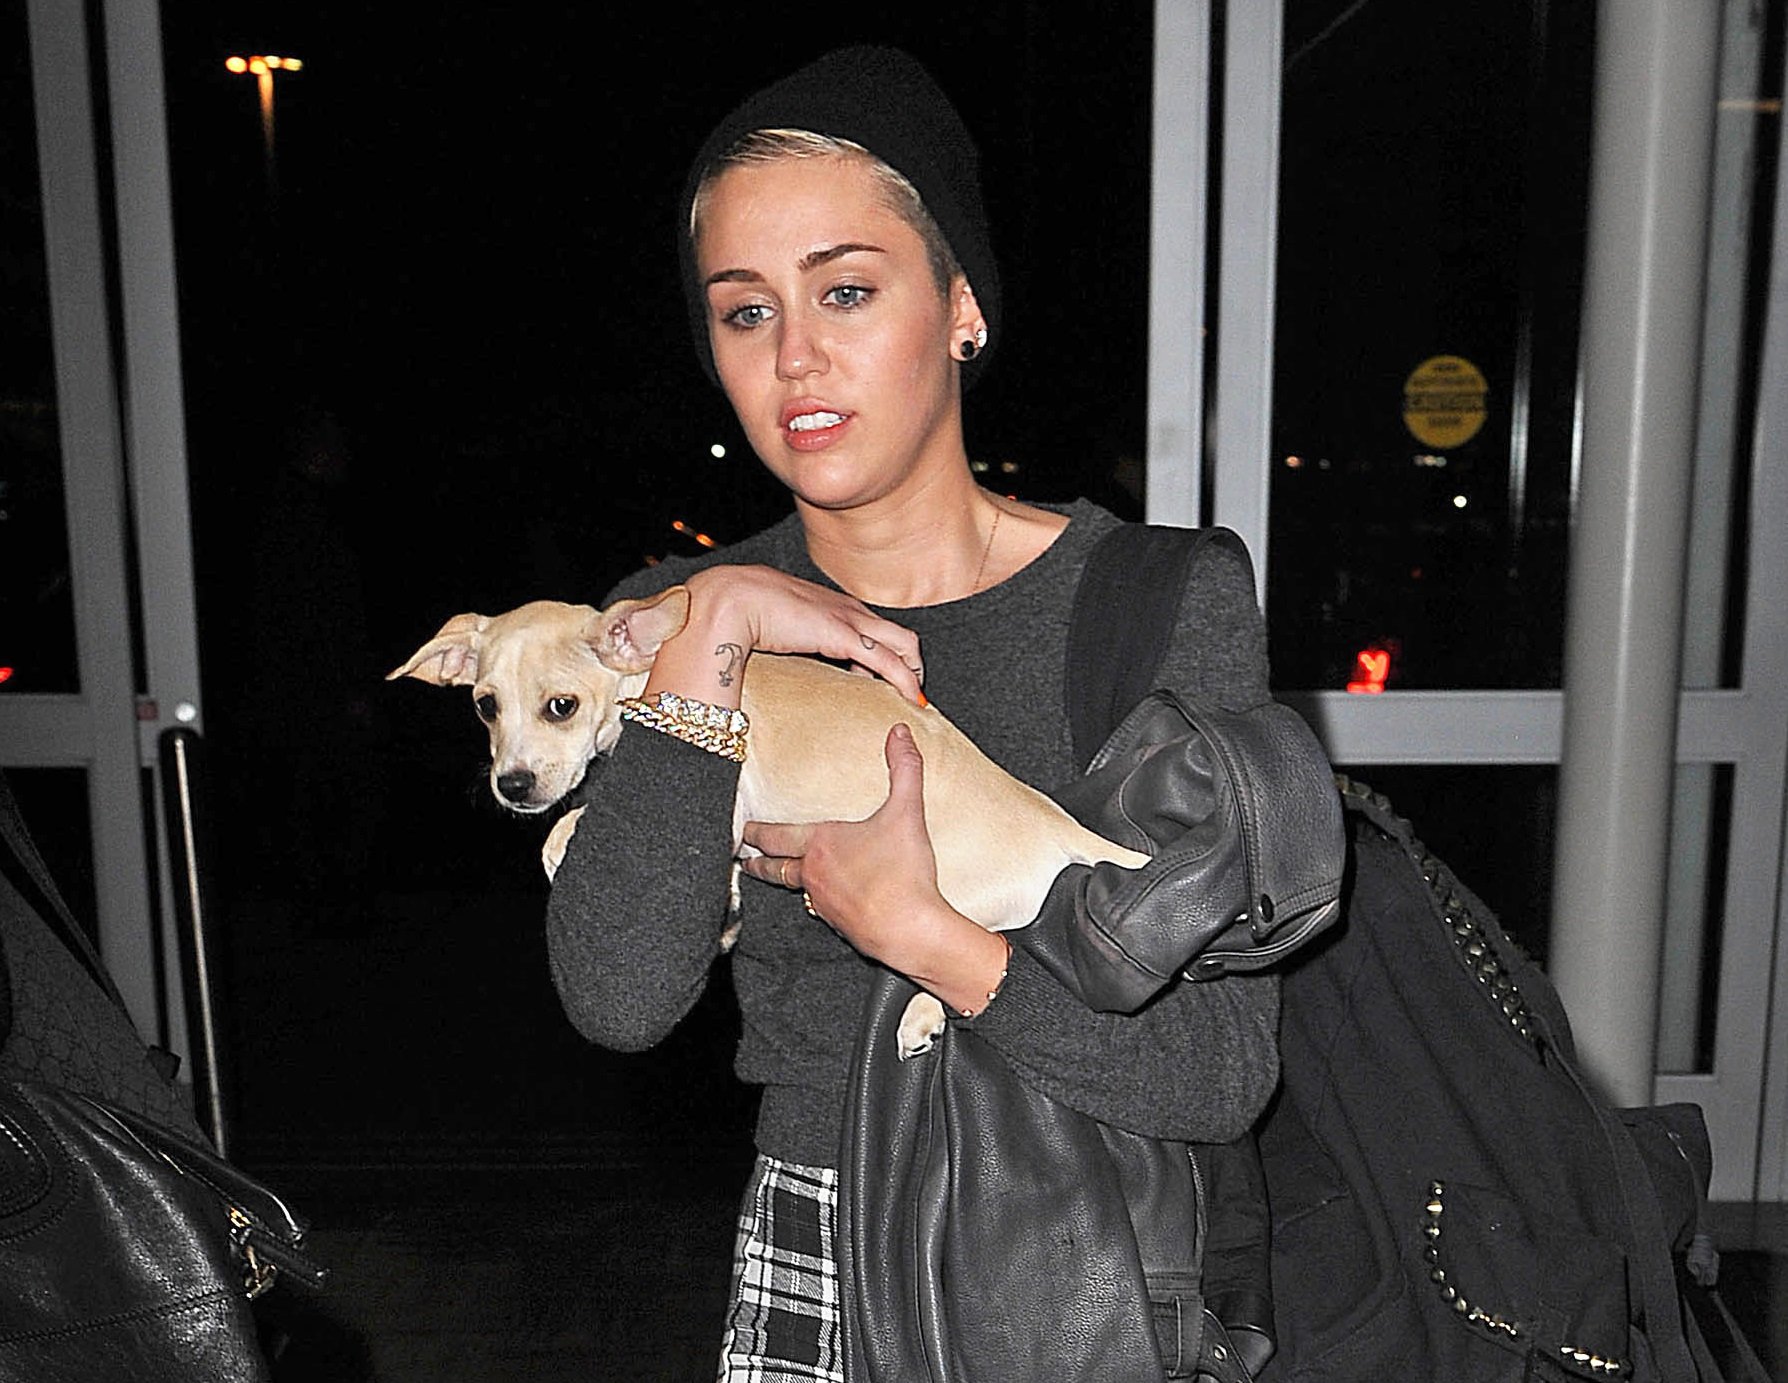 Singer Miley Cyrus as seen on February 15, 2013 in New York City.